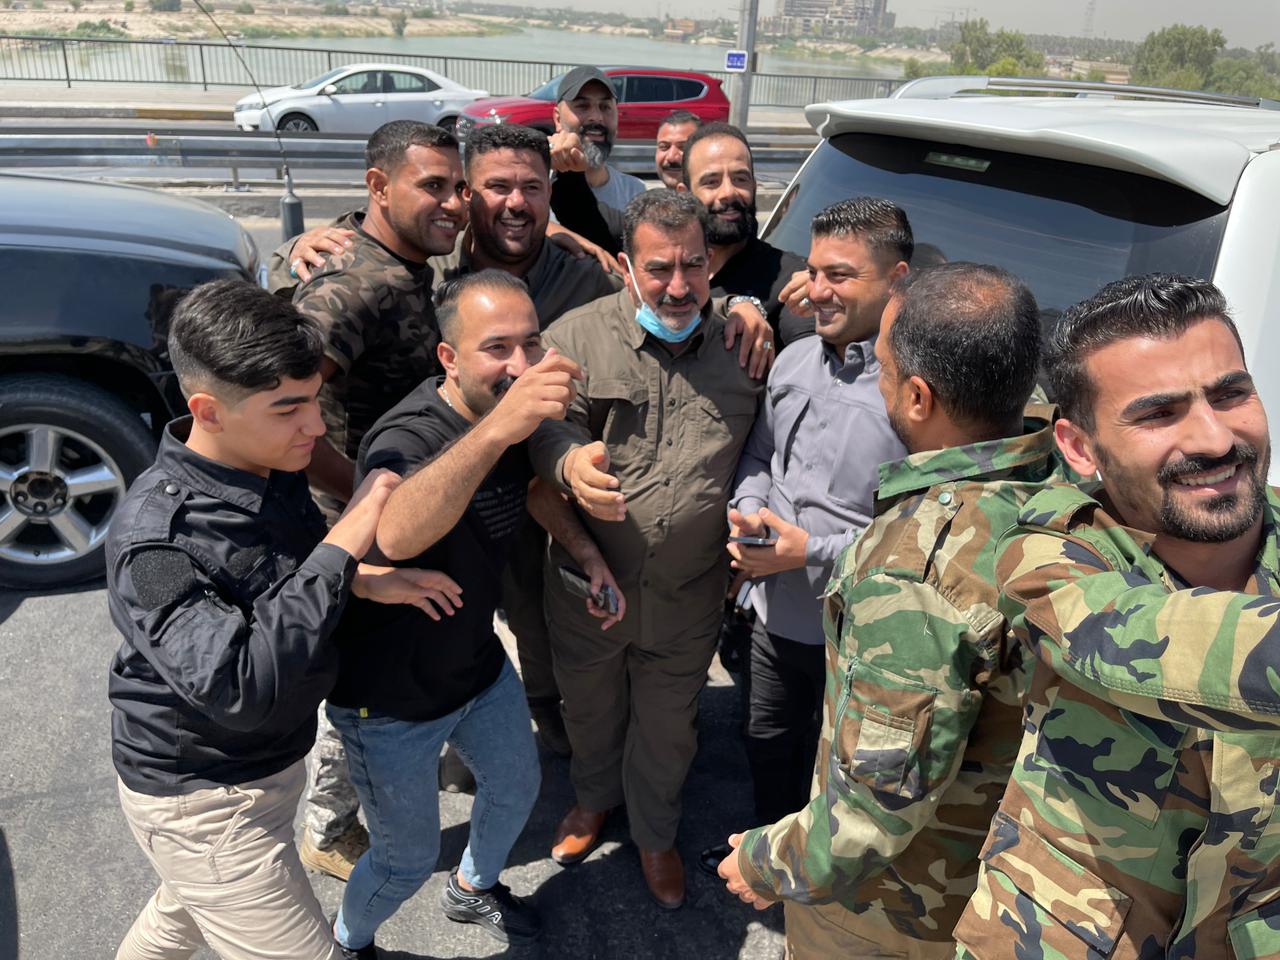 PMF leader Qassem Musleh is released, Photos show